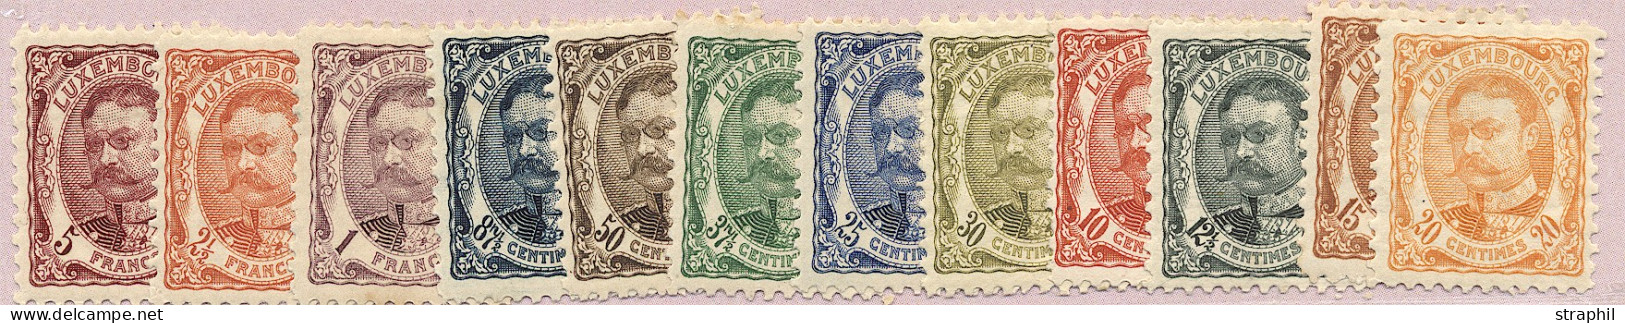 * LUXEMBOURG - 1906 Guillermo IV